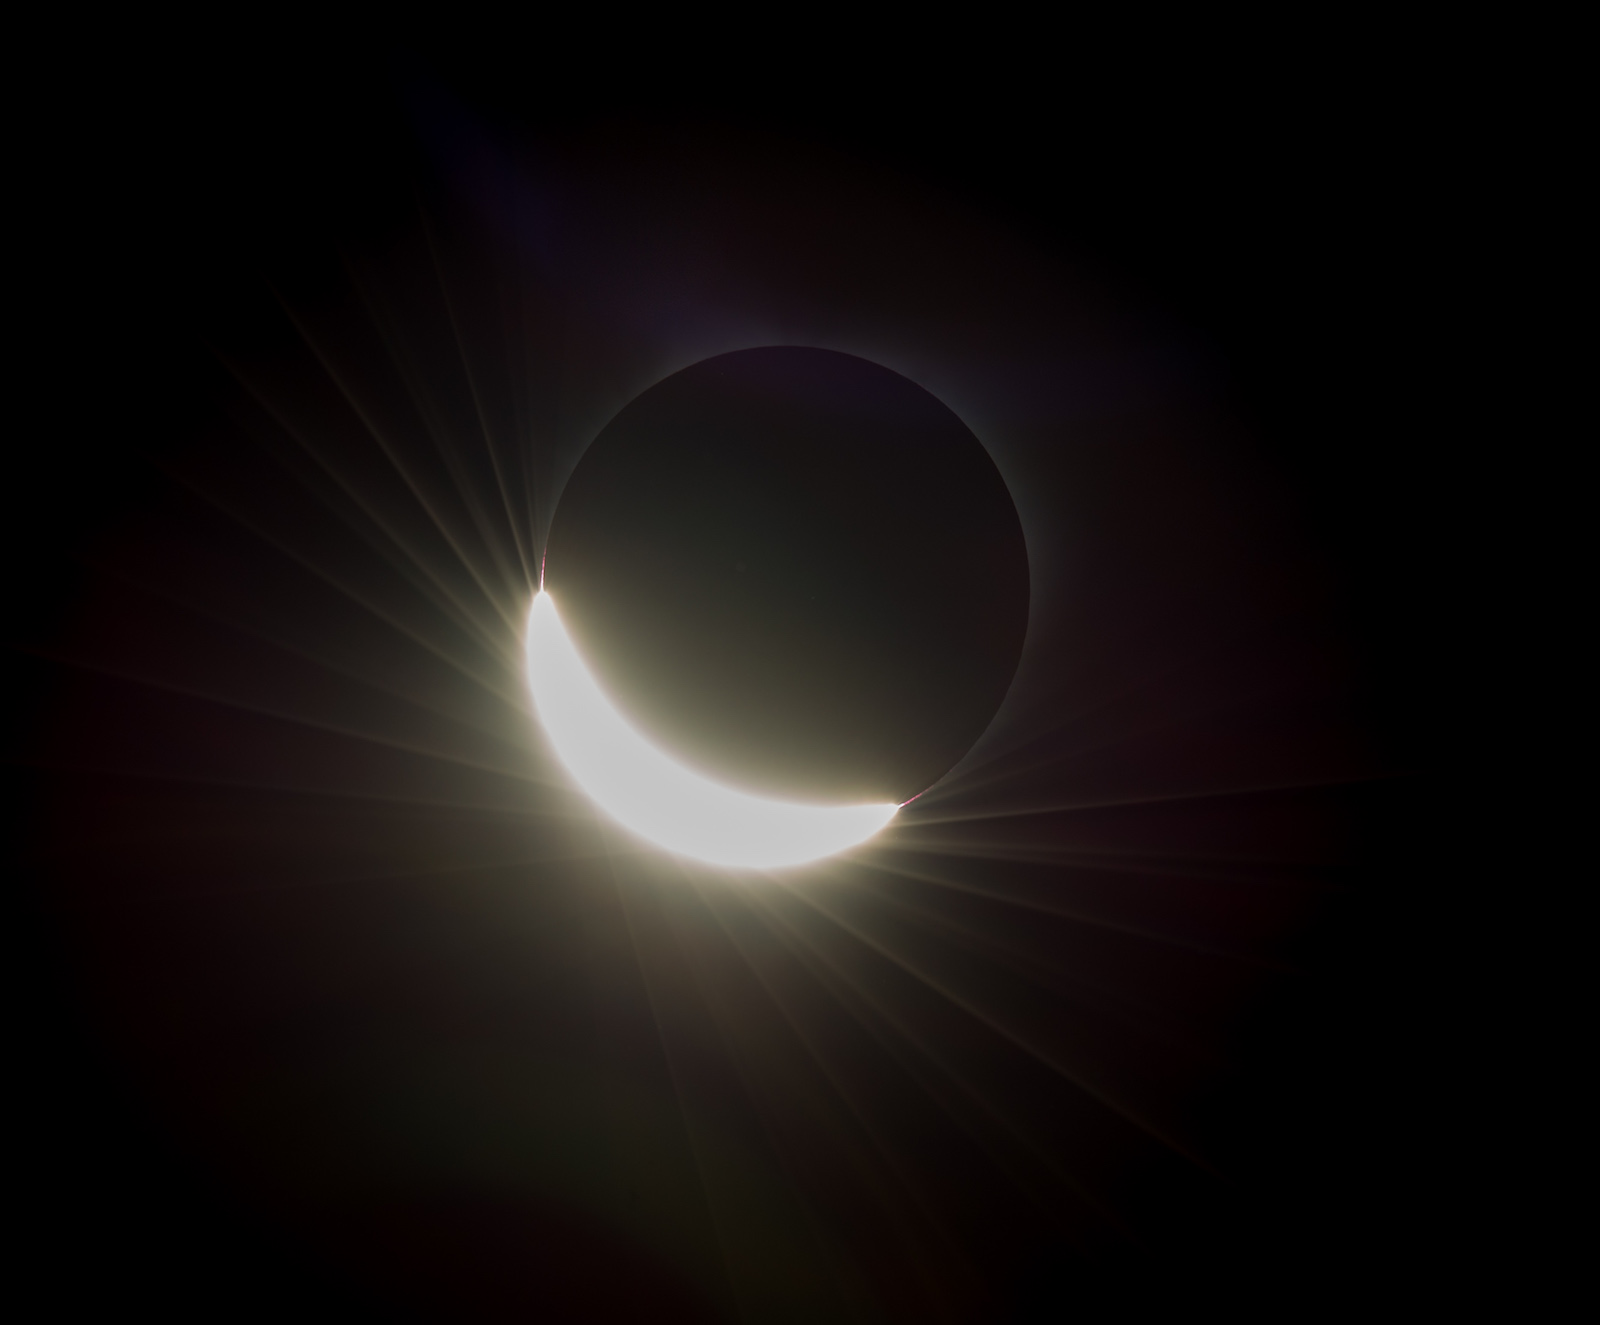 The last glimmer of the sun is seen as the moon makes its final move over the sun during the total solar eclipse on Monday, August 21, 2017 above Madras, Oregon. A total solar eclipse swept across a narrow portion of the contiguous United States from Lincoln Beach, Oregon to Charleston, South Carolina. A partial solar eclipse was visible across the entire North American continent along with parts of South America, Africa, and Europe.  Photo Credit: (NASA/Aubrey Gemignani)